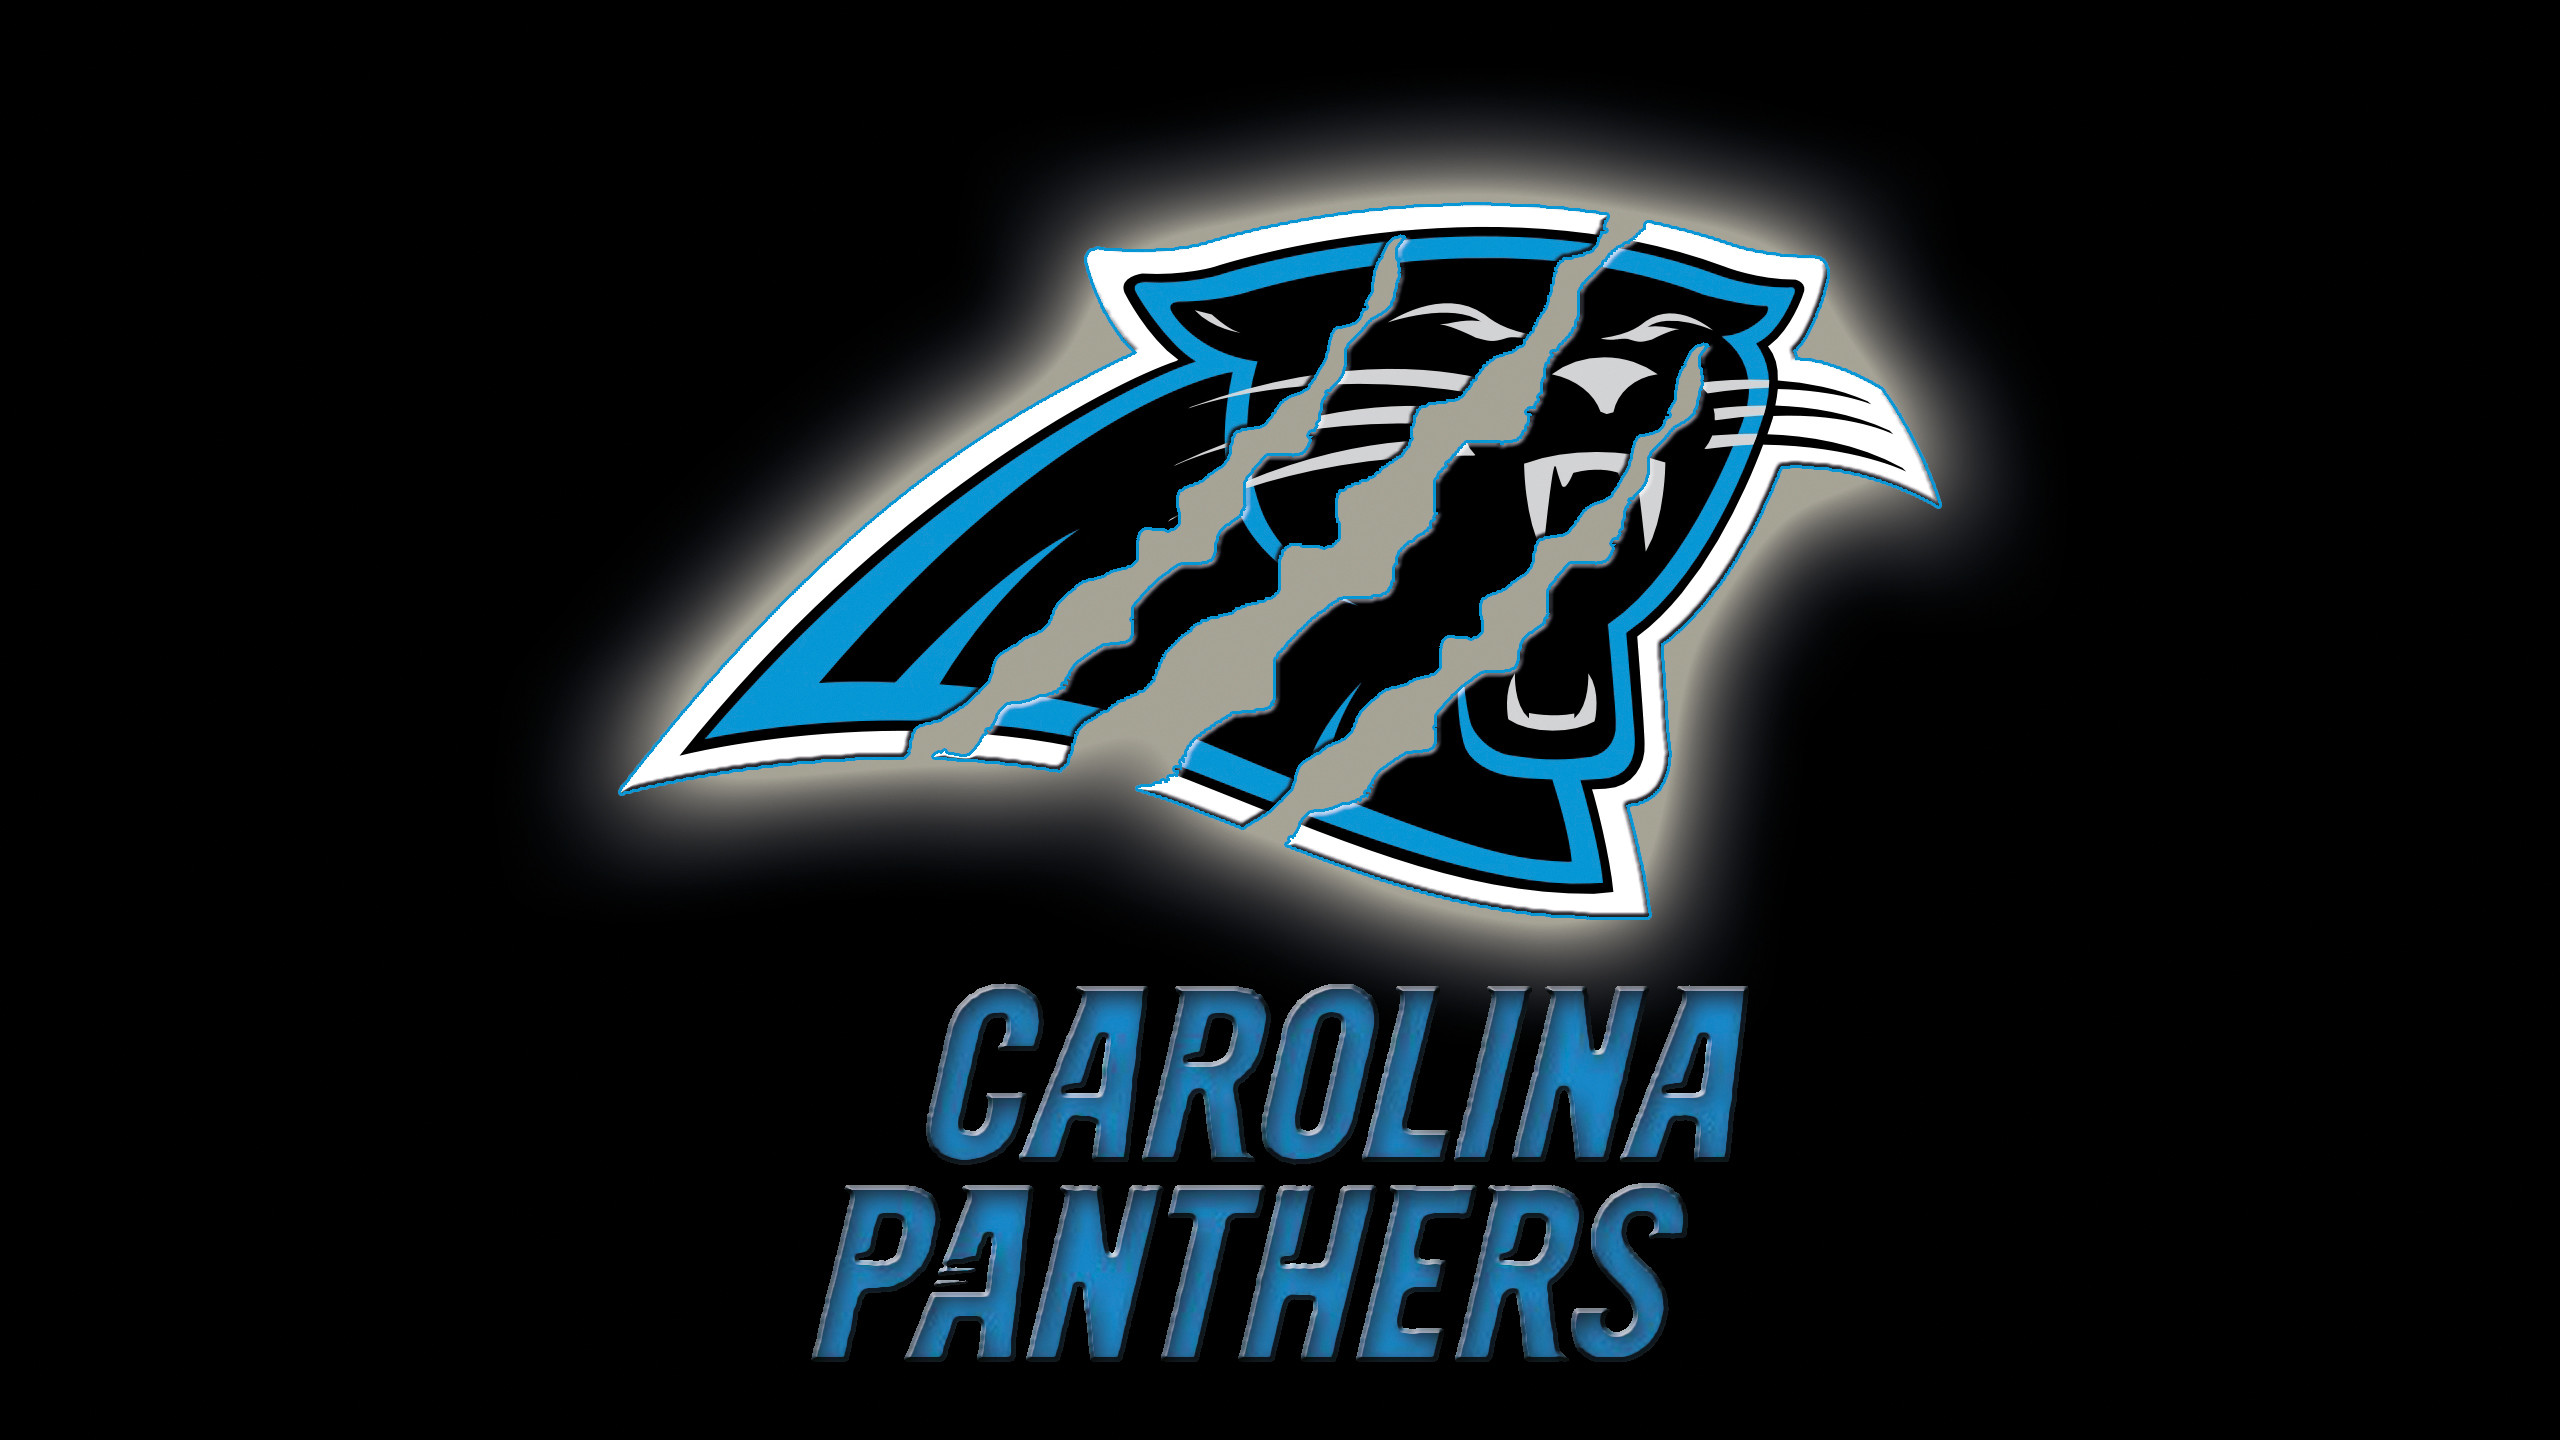 2560x1440 Excellent Carolina Panthers Wallpaper | Full HD Pictures